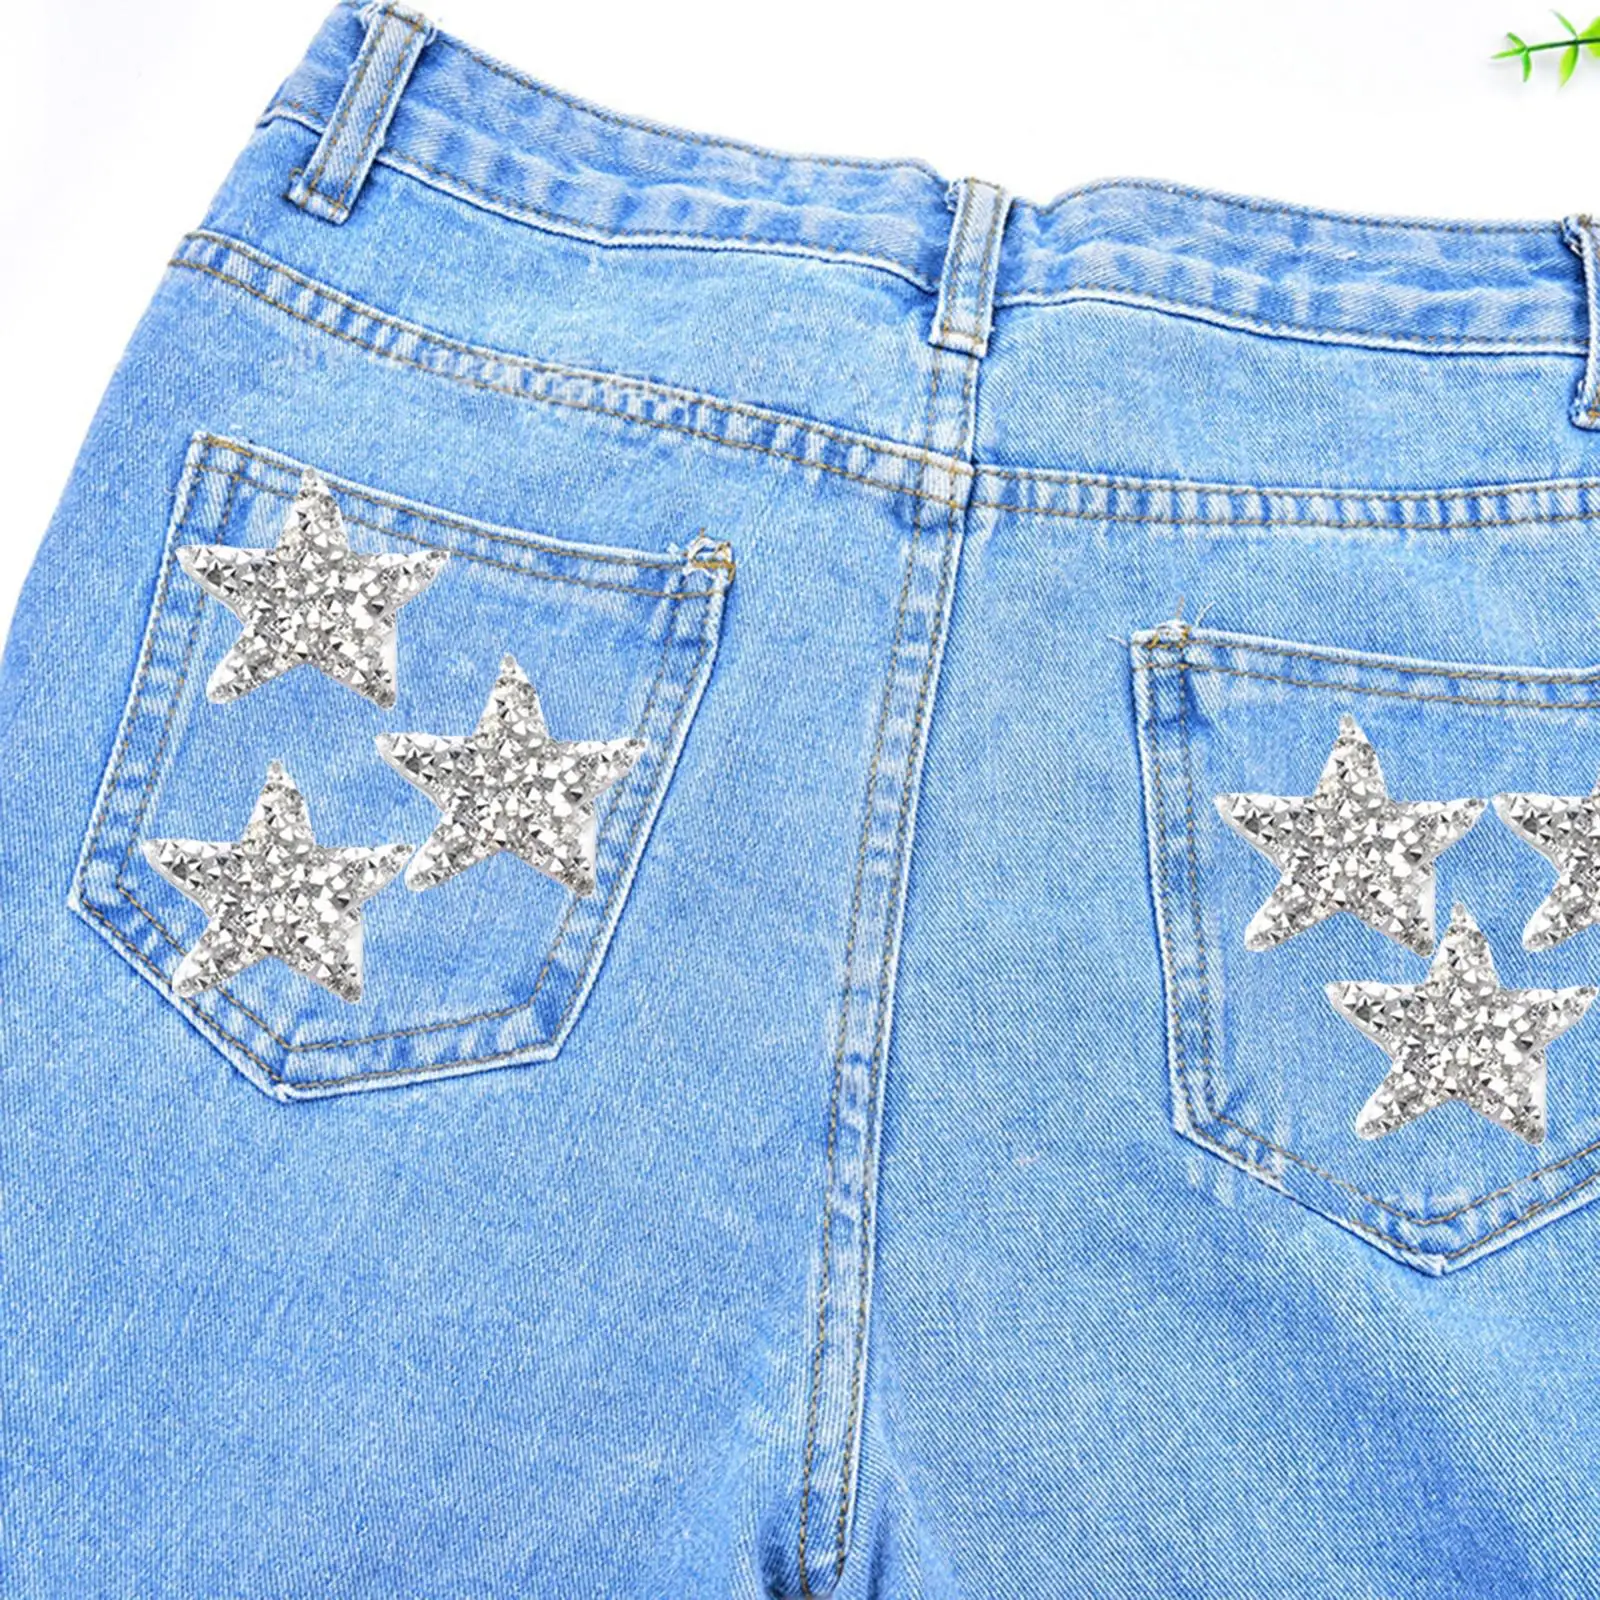 6 pcs Star Patches Rhinestone  Applique Patches Adhesive Stick for Clothing Sticker Badge  for Clothes Bag Pants Cellphone